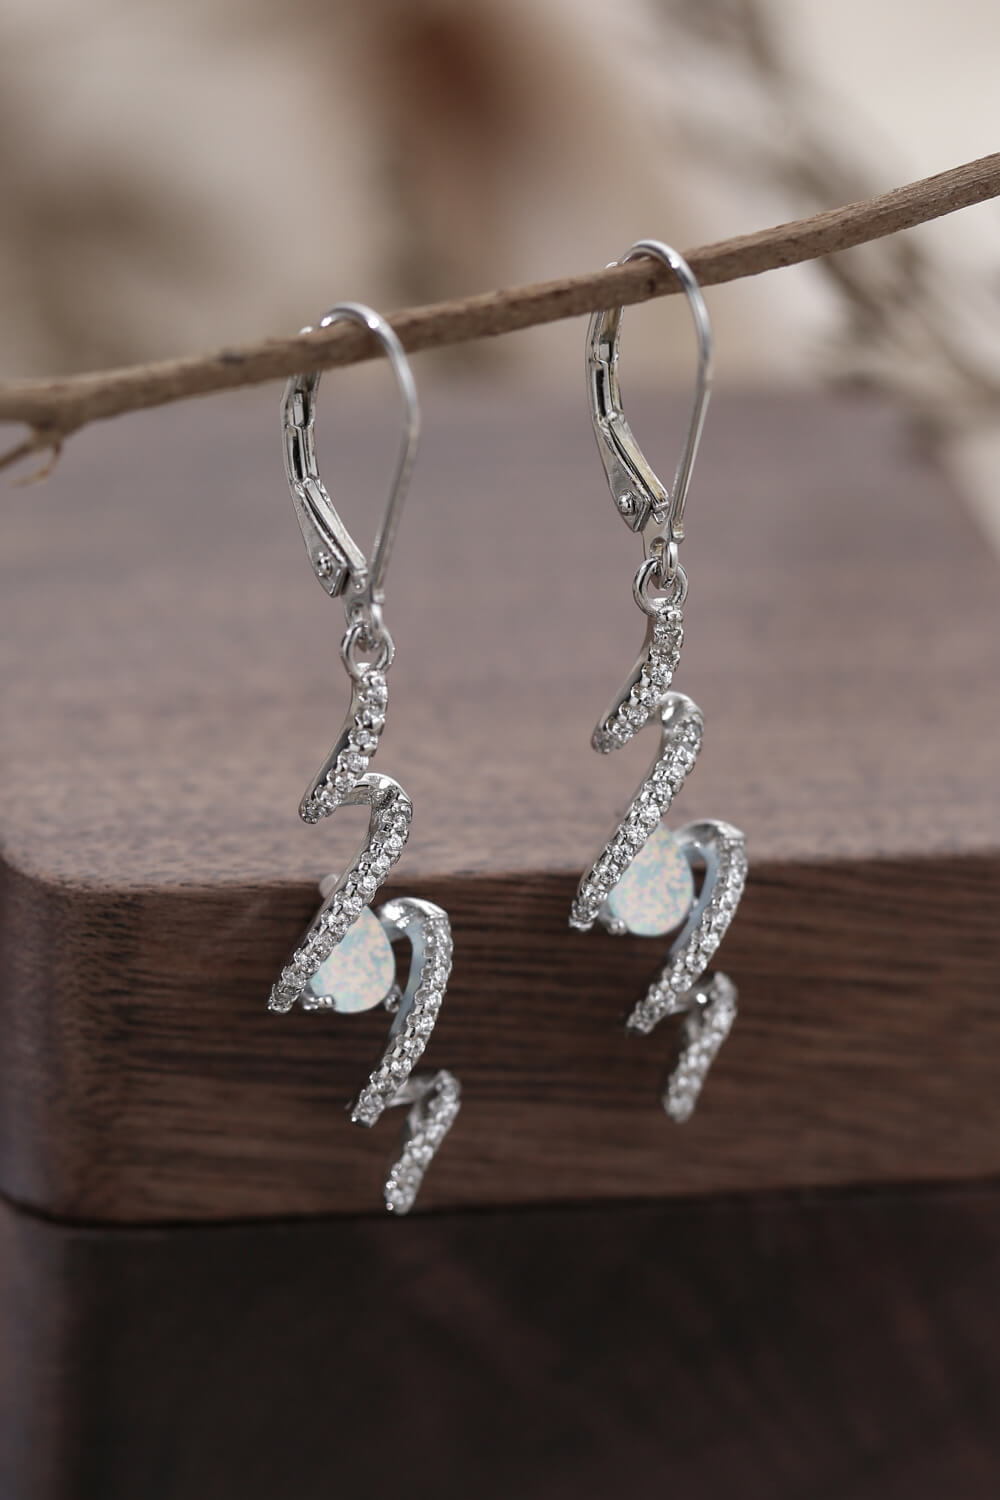 Twisted Opal Drop Earrings - Enchanting Drops of Ethereal Beauty - Elevate Your Look with Timeless Romance - Guy Christopher 